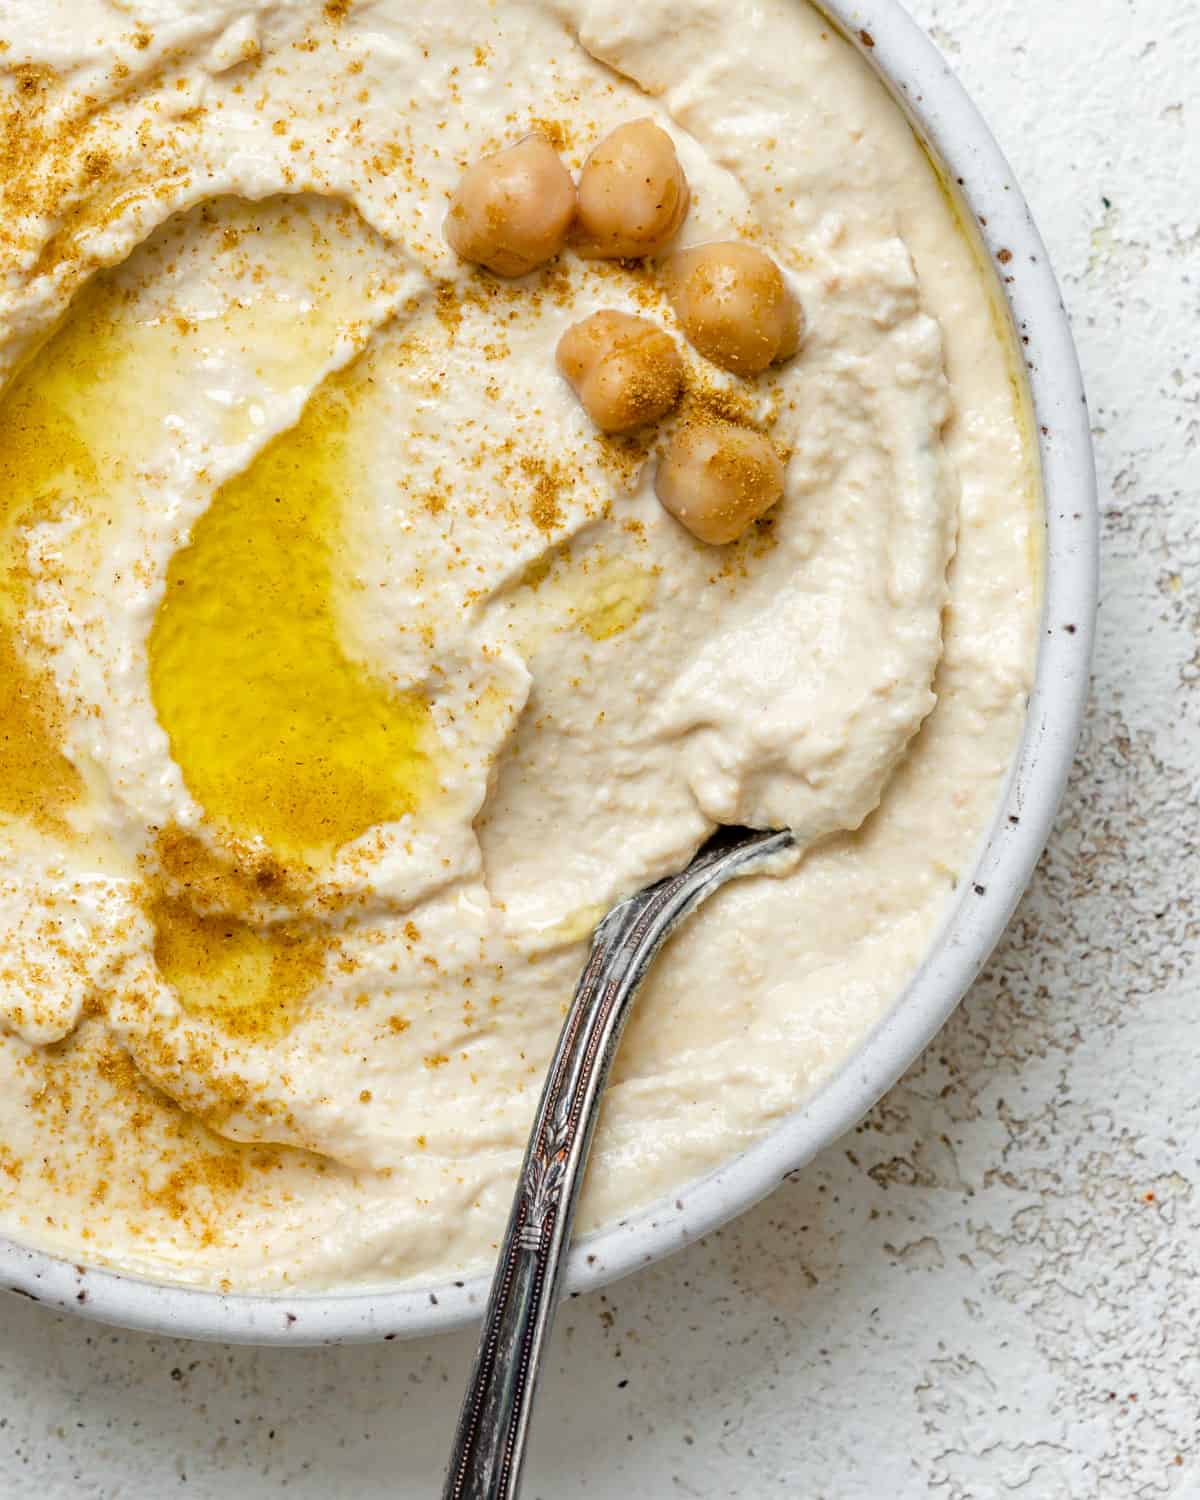 Ready Easy Hummus in a bowl against a light background